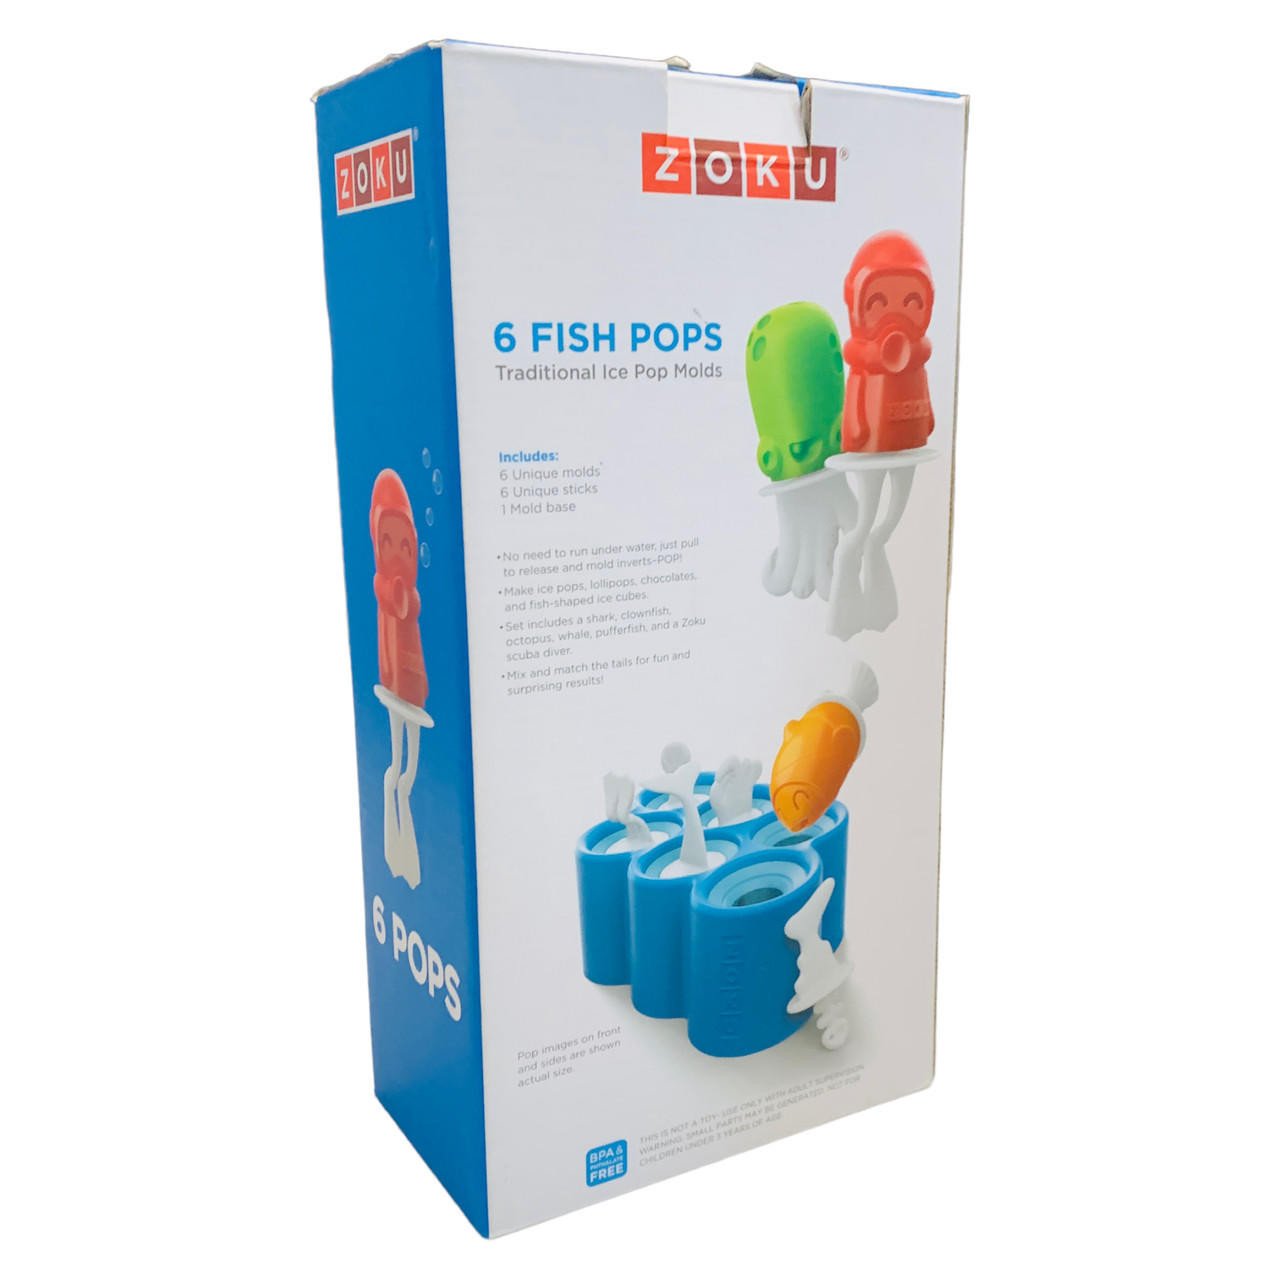 https://cdn11.bigcommerce.com/s-dh8qgqum9n/images/stencil/1280x1280/products/5695/26992/zoku-fish-pop-molds-6-silicone-popsicle-molds__33573.1669575577.jpg?c=1